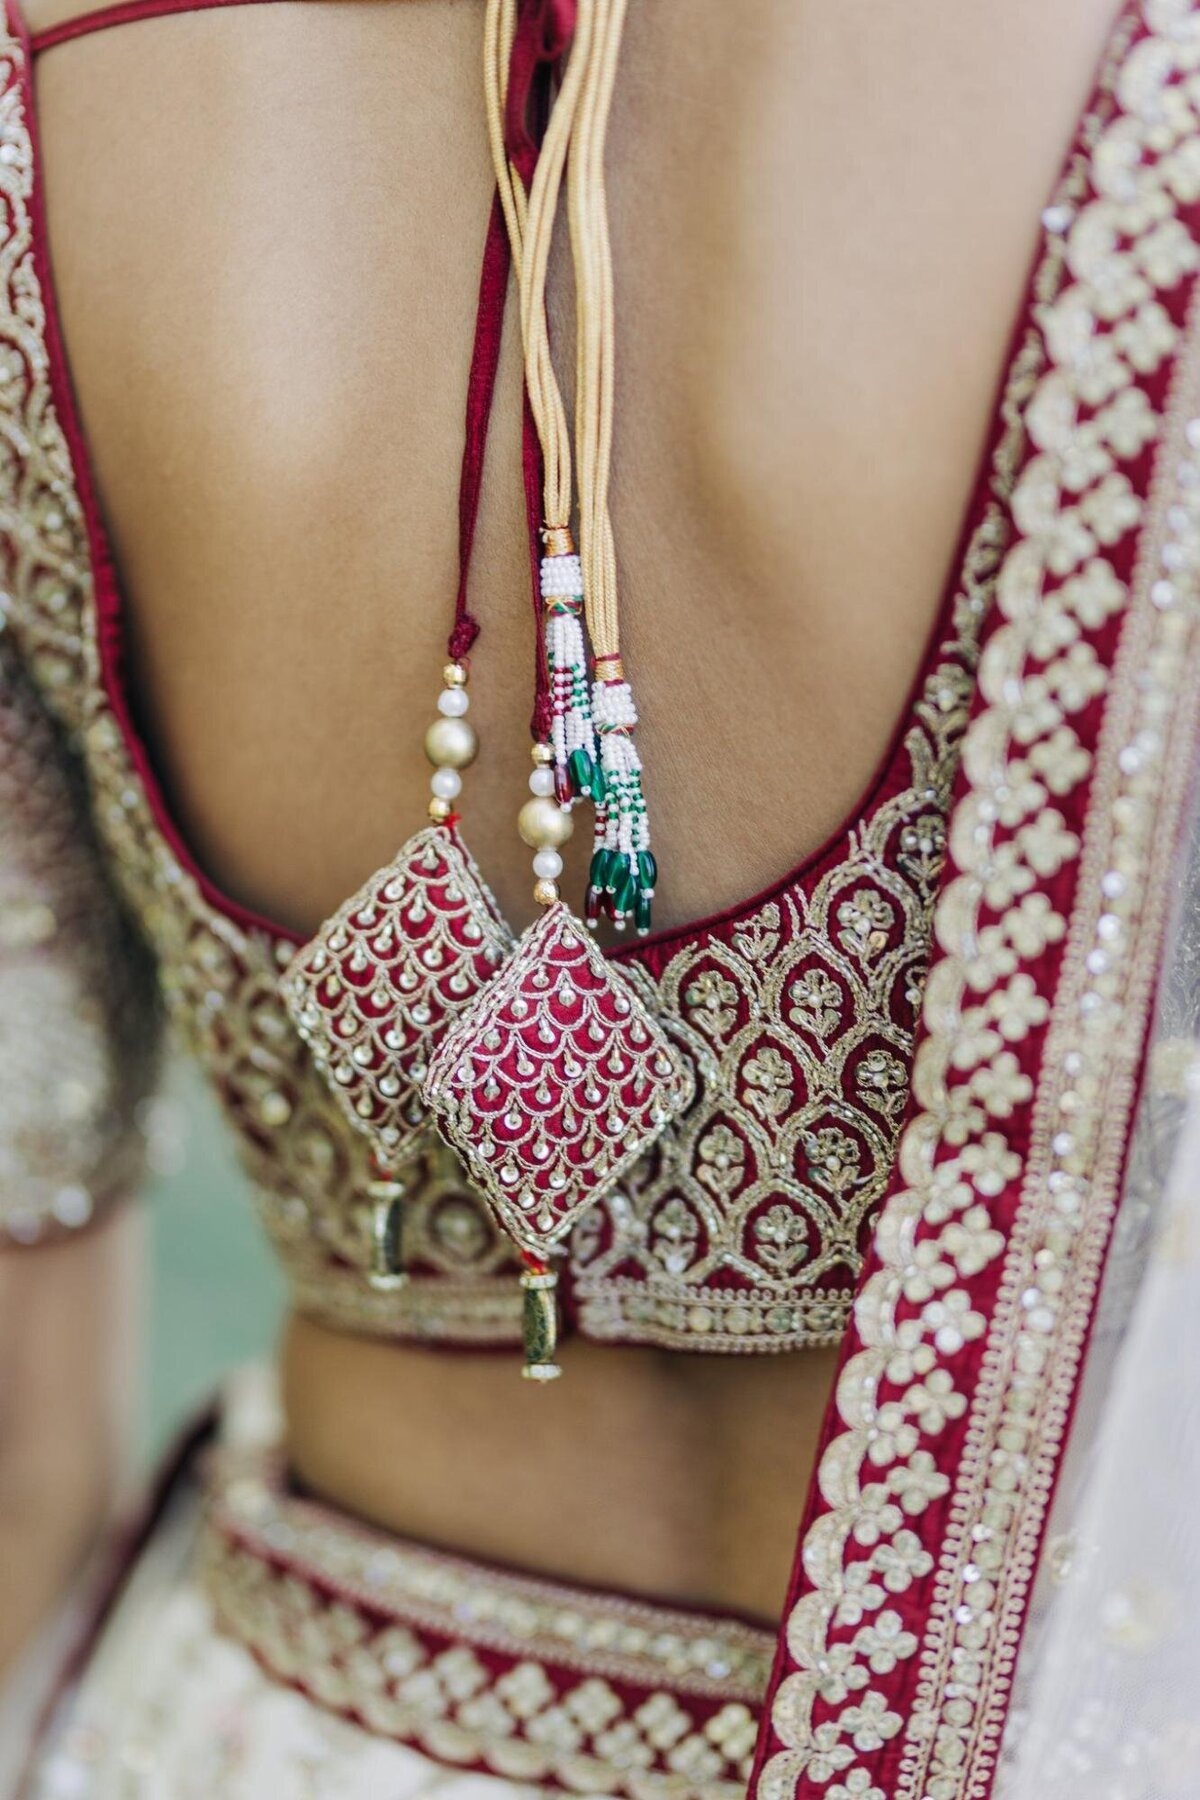 Close-up of a woman in a traditional embroidered red and white saree, focusing on the intricate patterns and beadwork on the blouse and saree border.